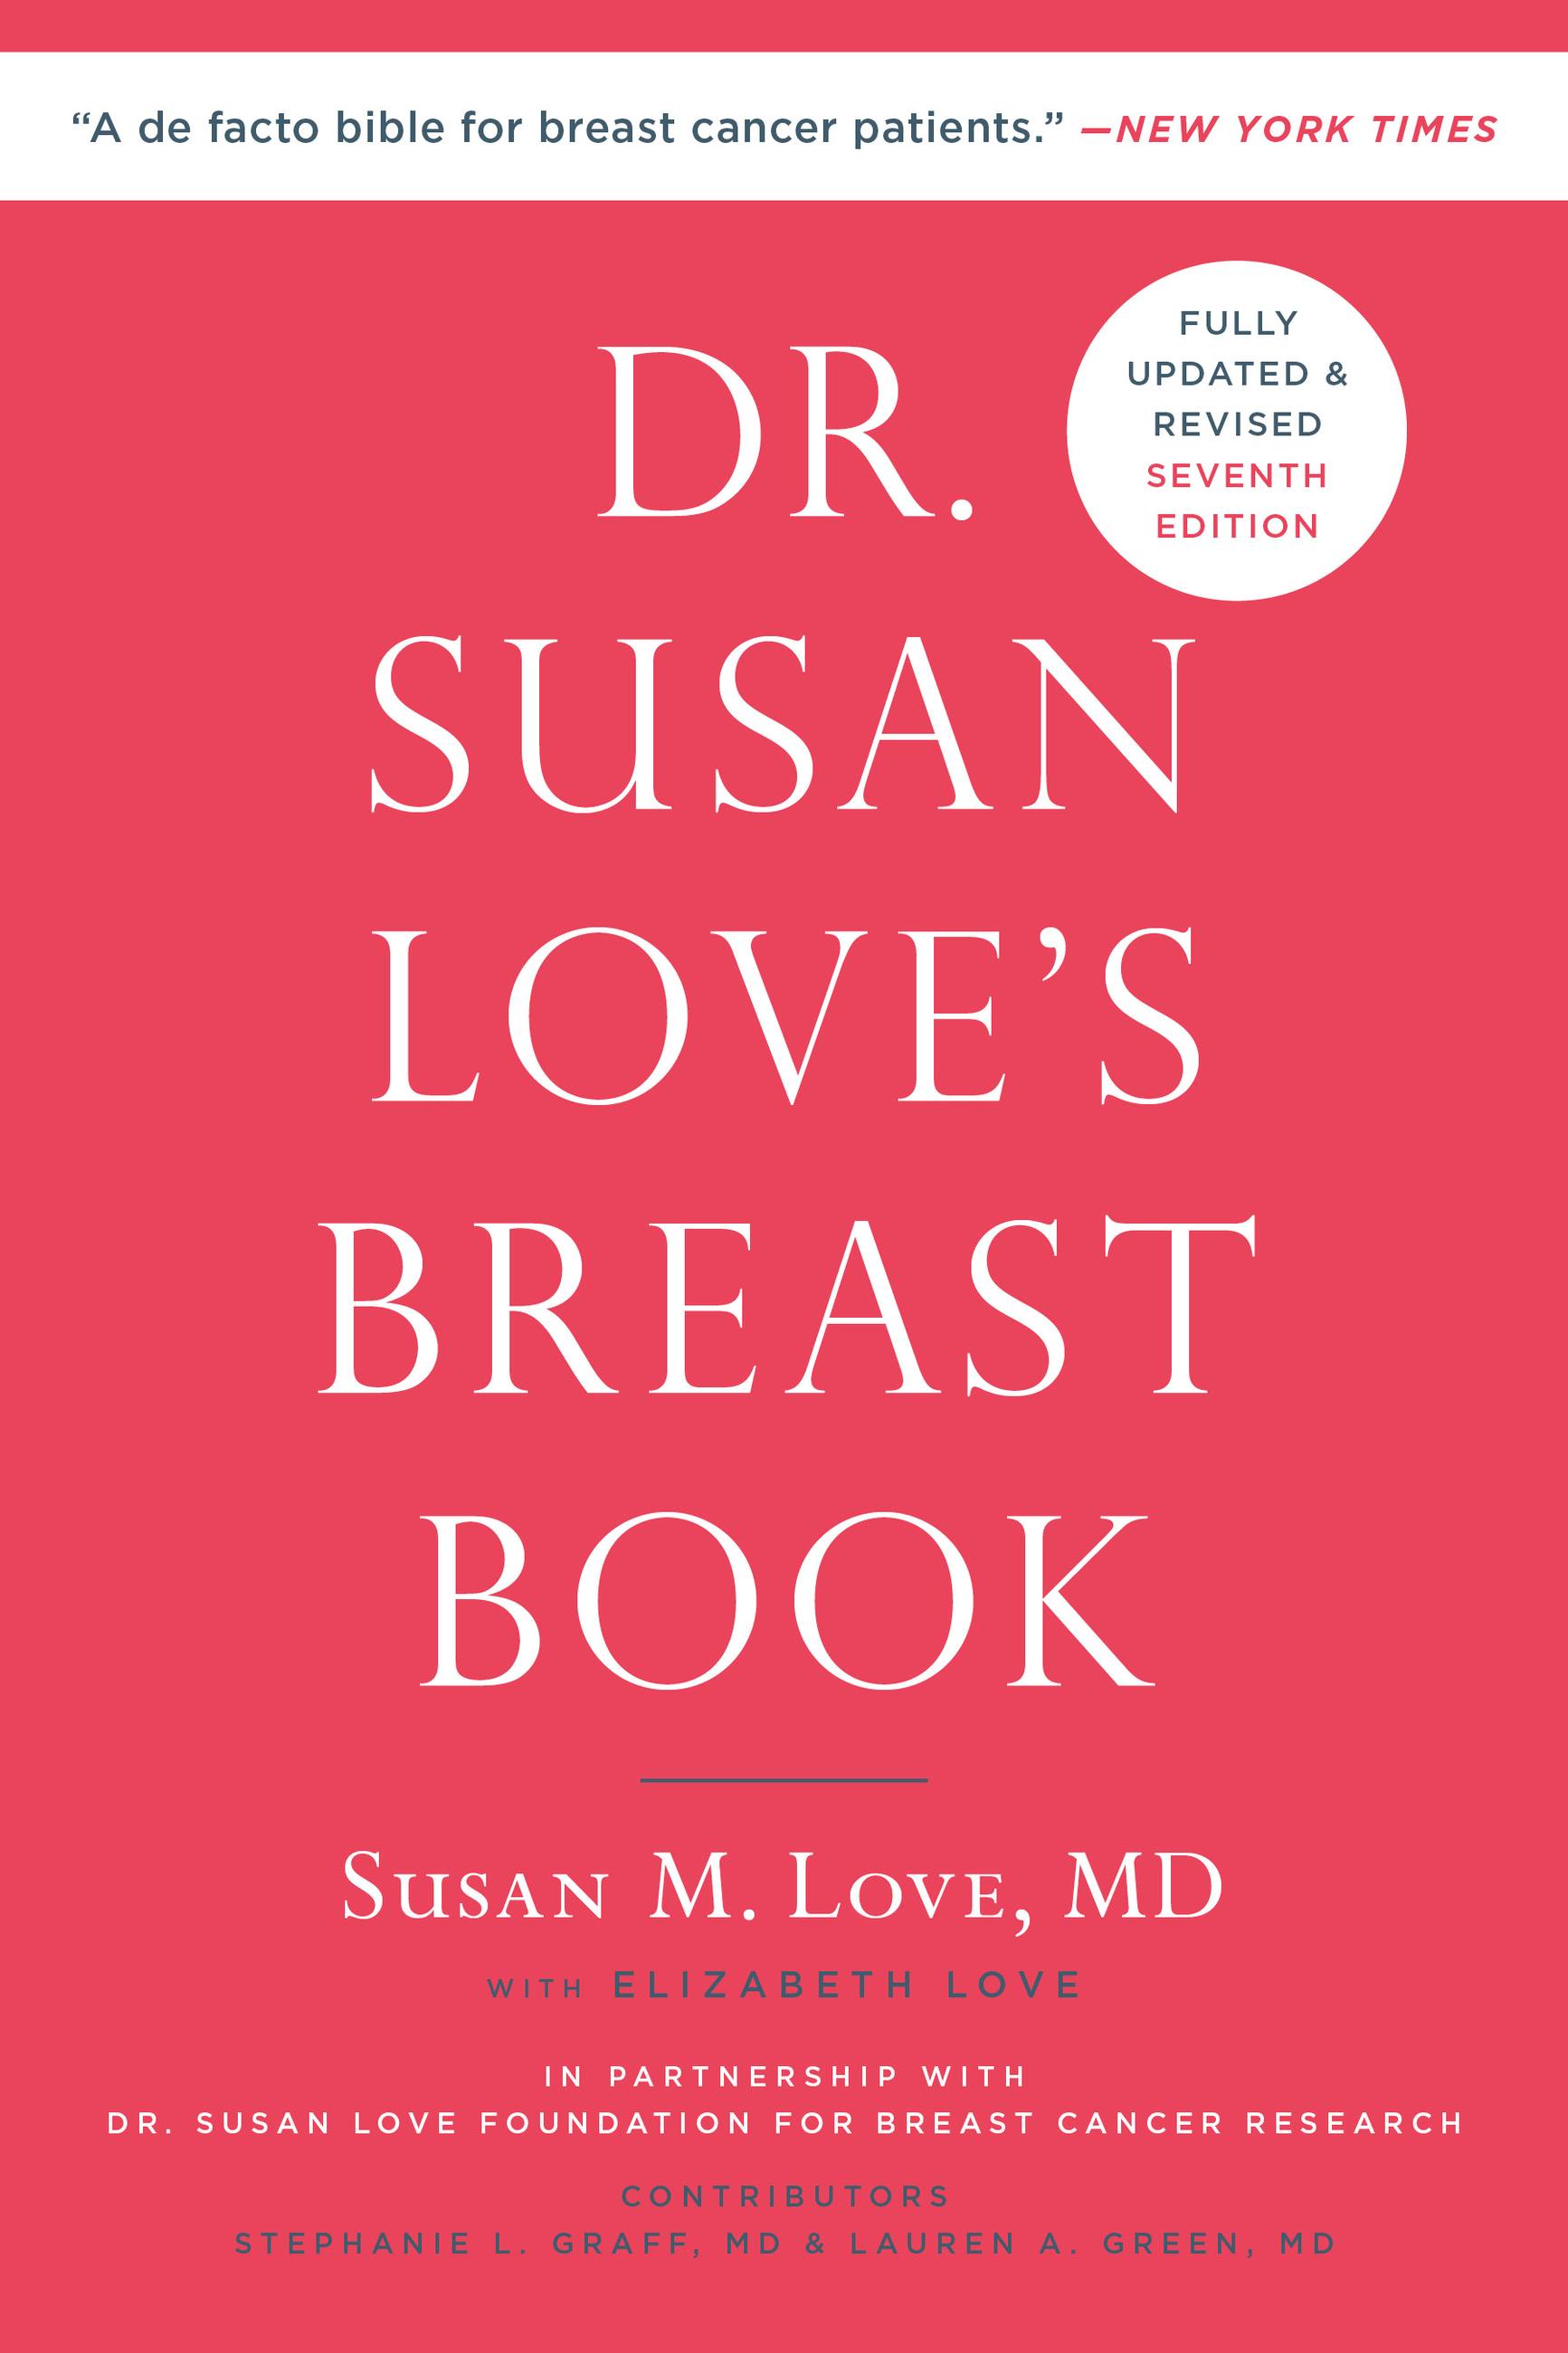 Dr. Susan Love's Breast Book by Susan M. Love, MD